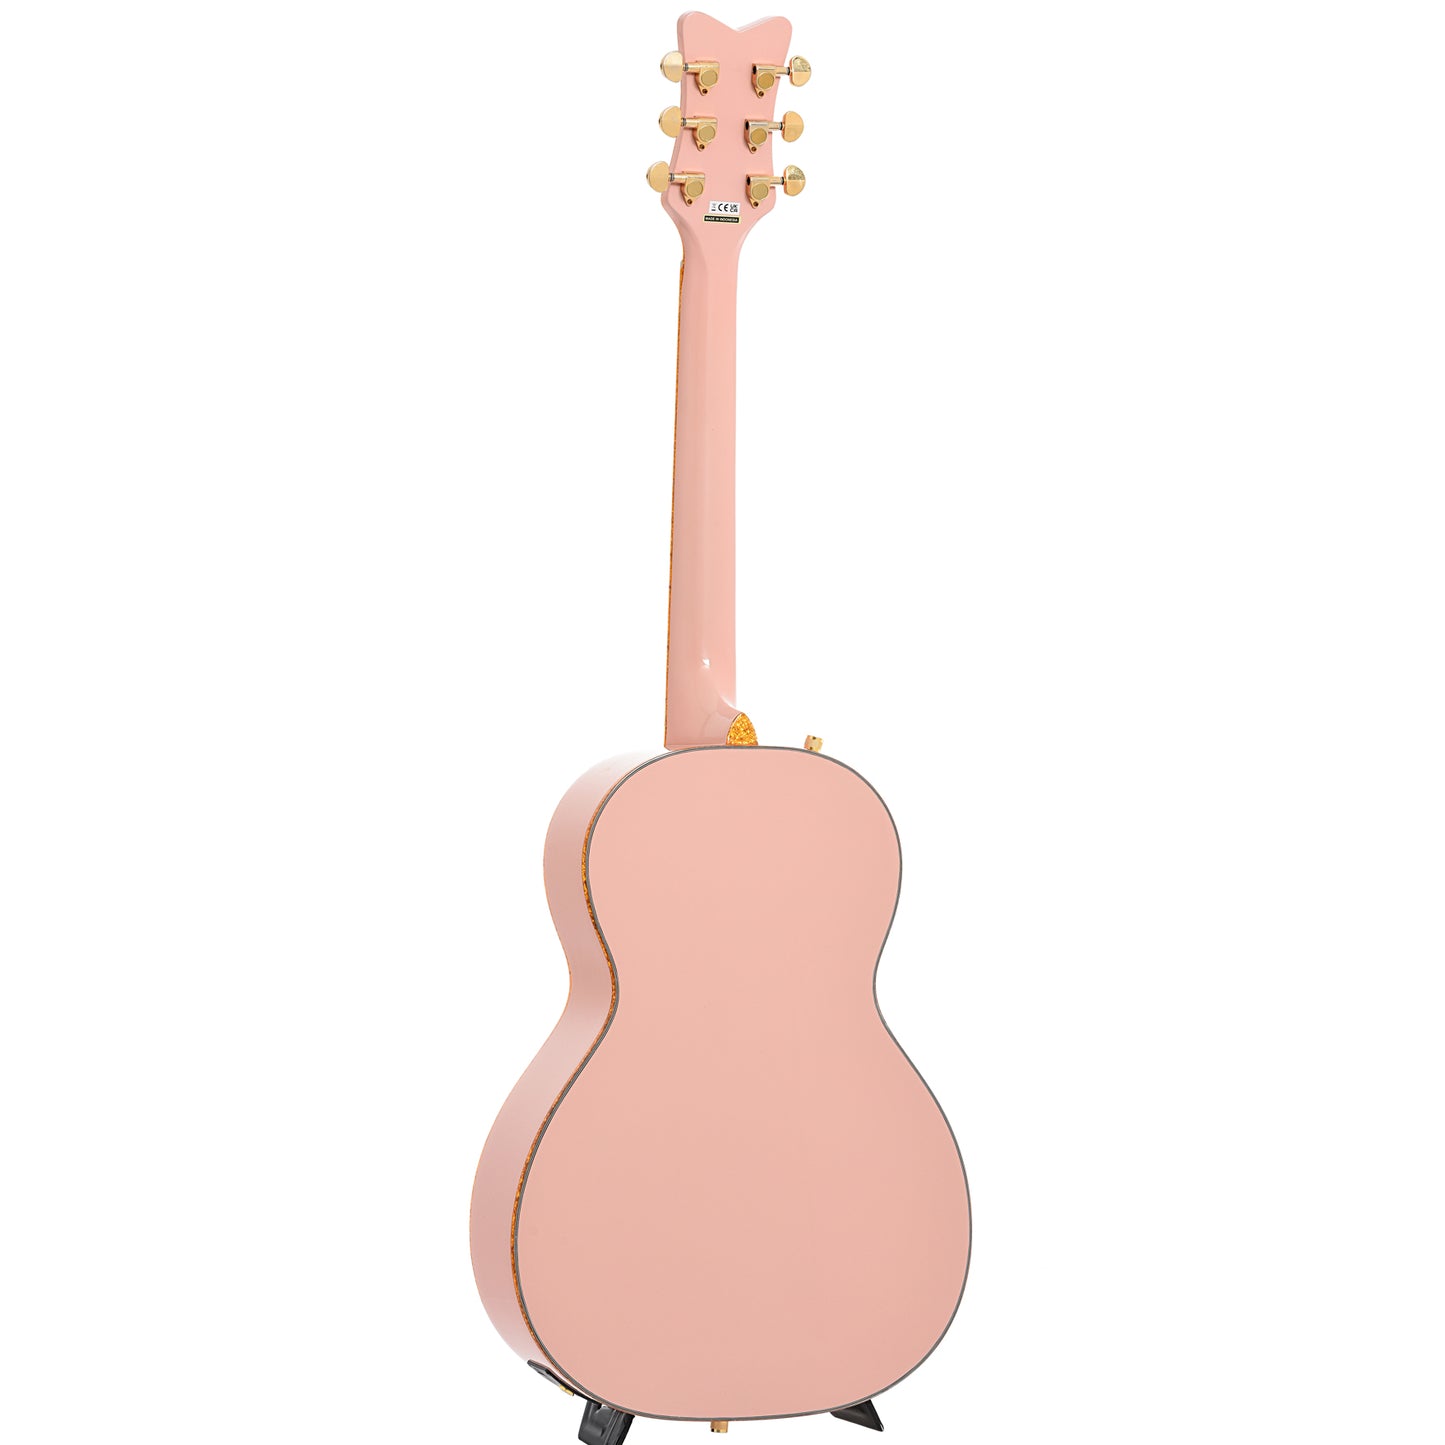 Full back and side of Gretsch G5021E Rancher Penguin Parlor Acoustic-Electric Guitar (2021)